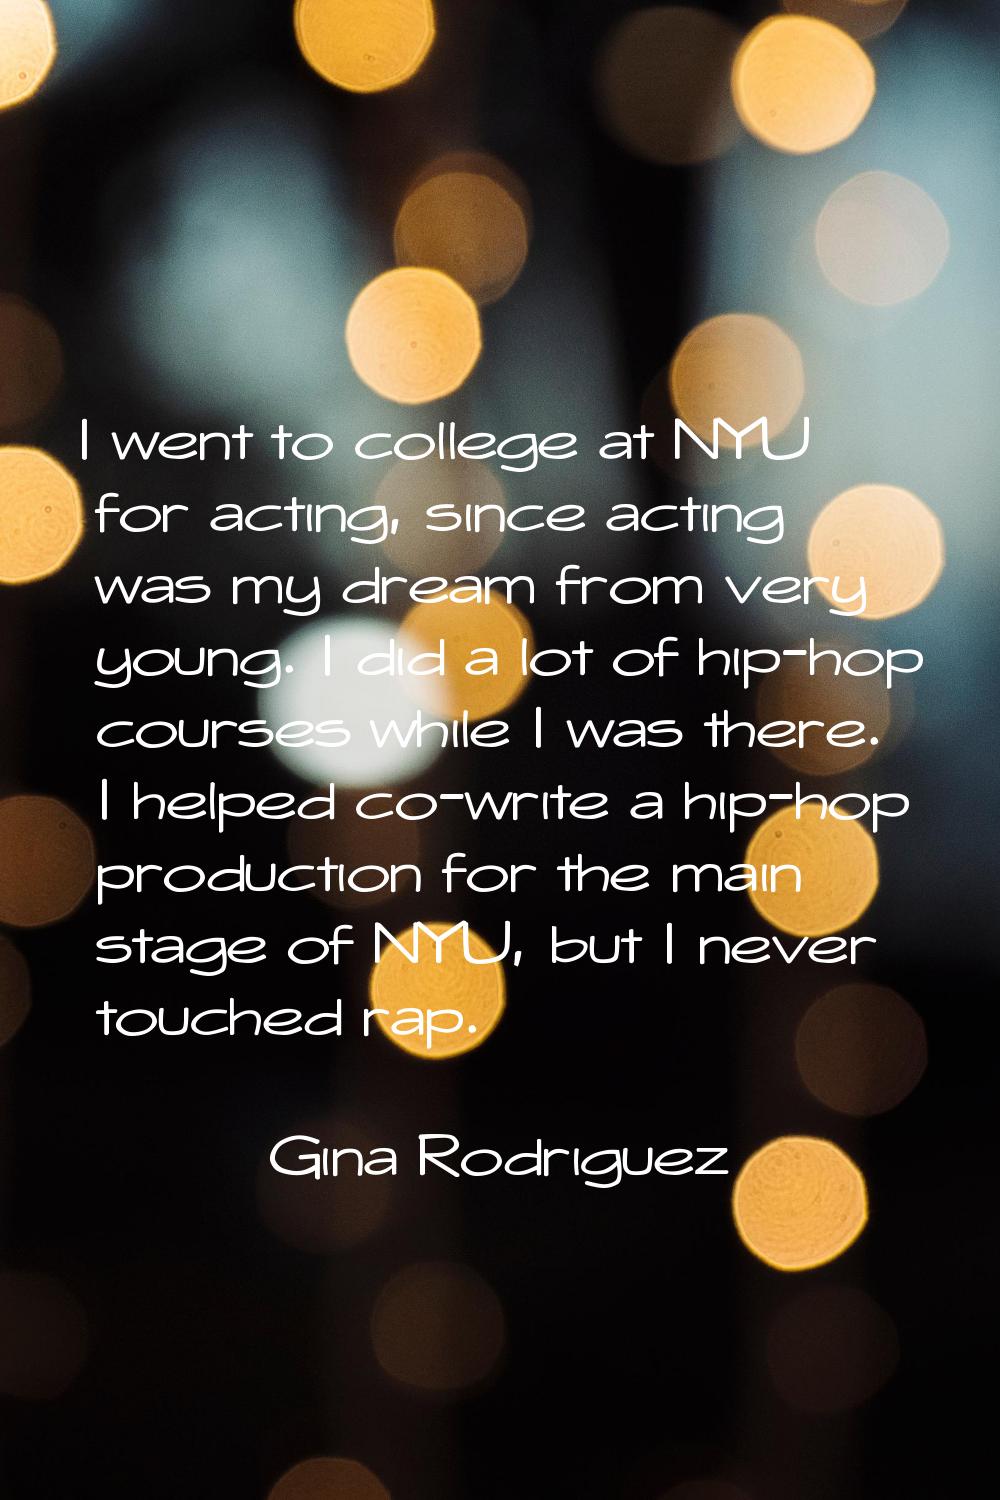 I went to college at NYU for acting, since acting was my dream from very young. I did a lot of hip-